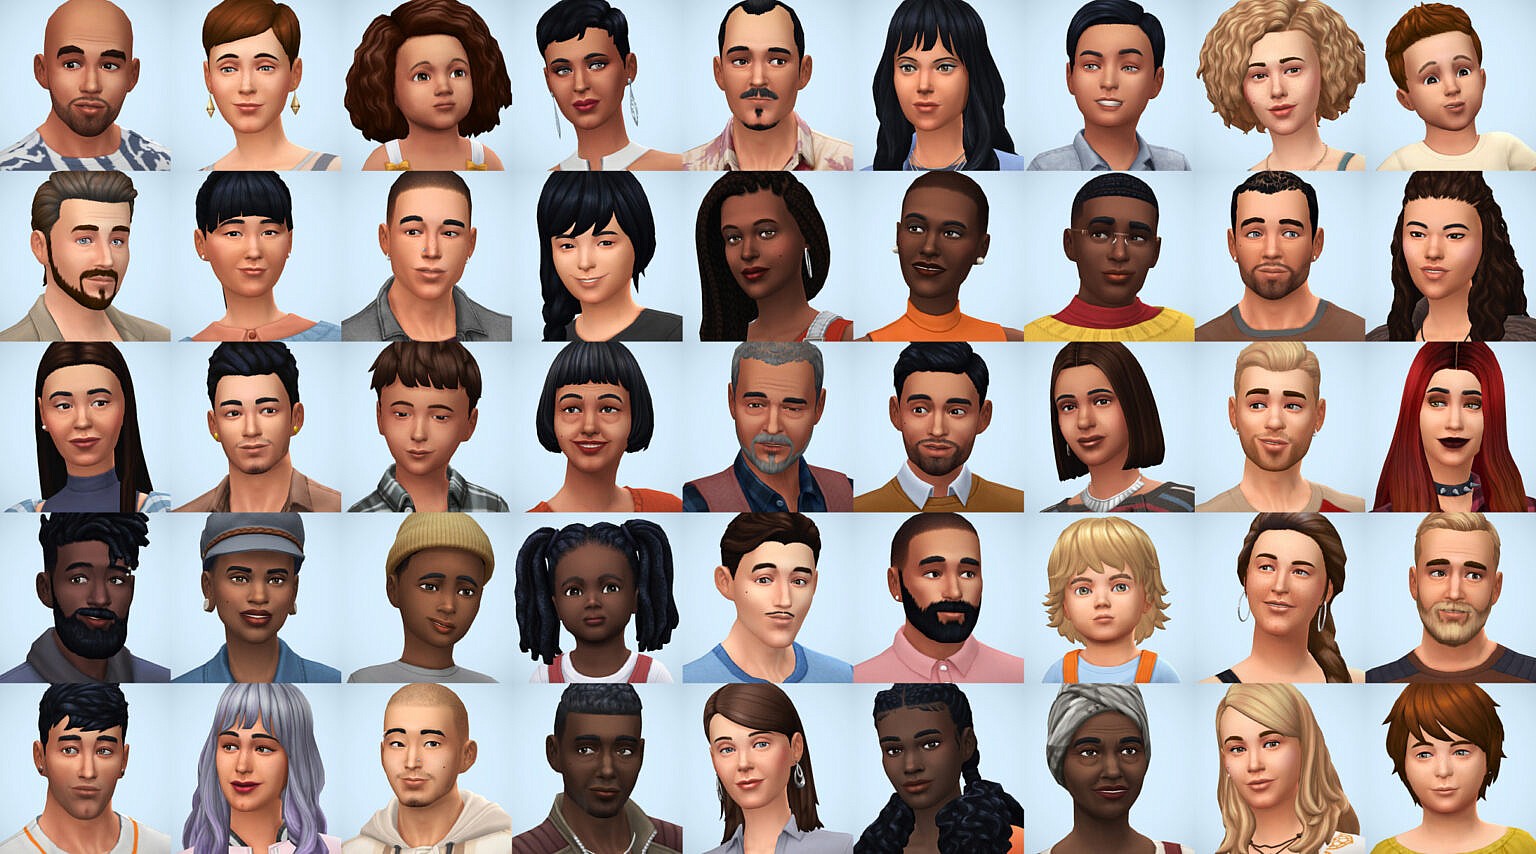 sims 4 free download 2021